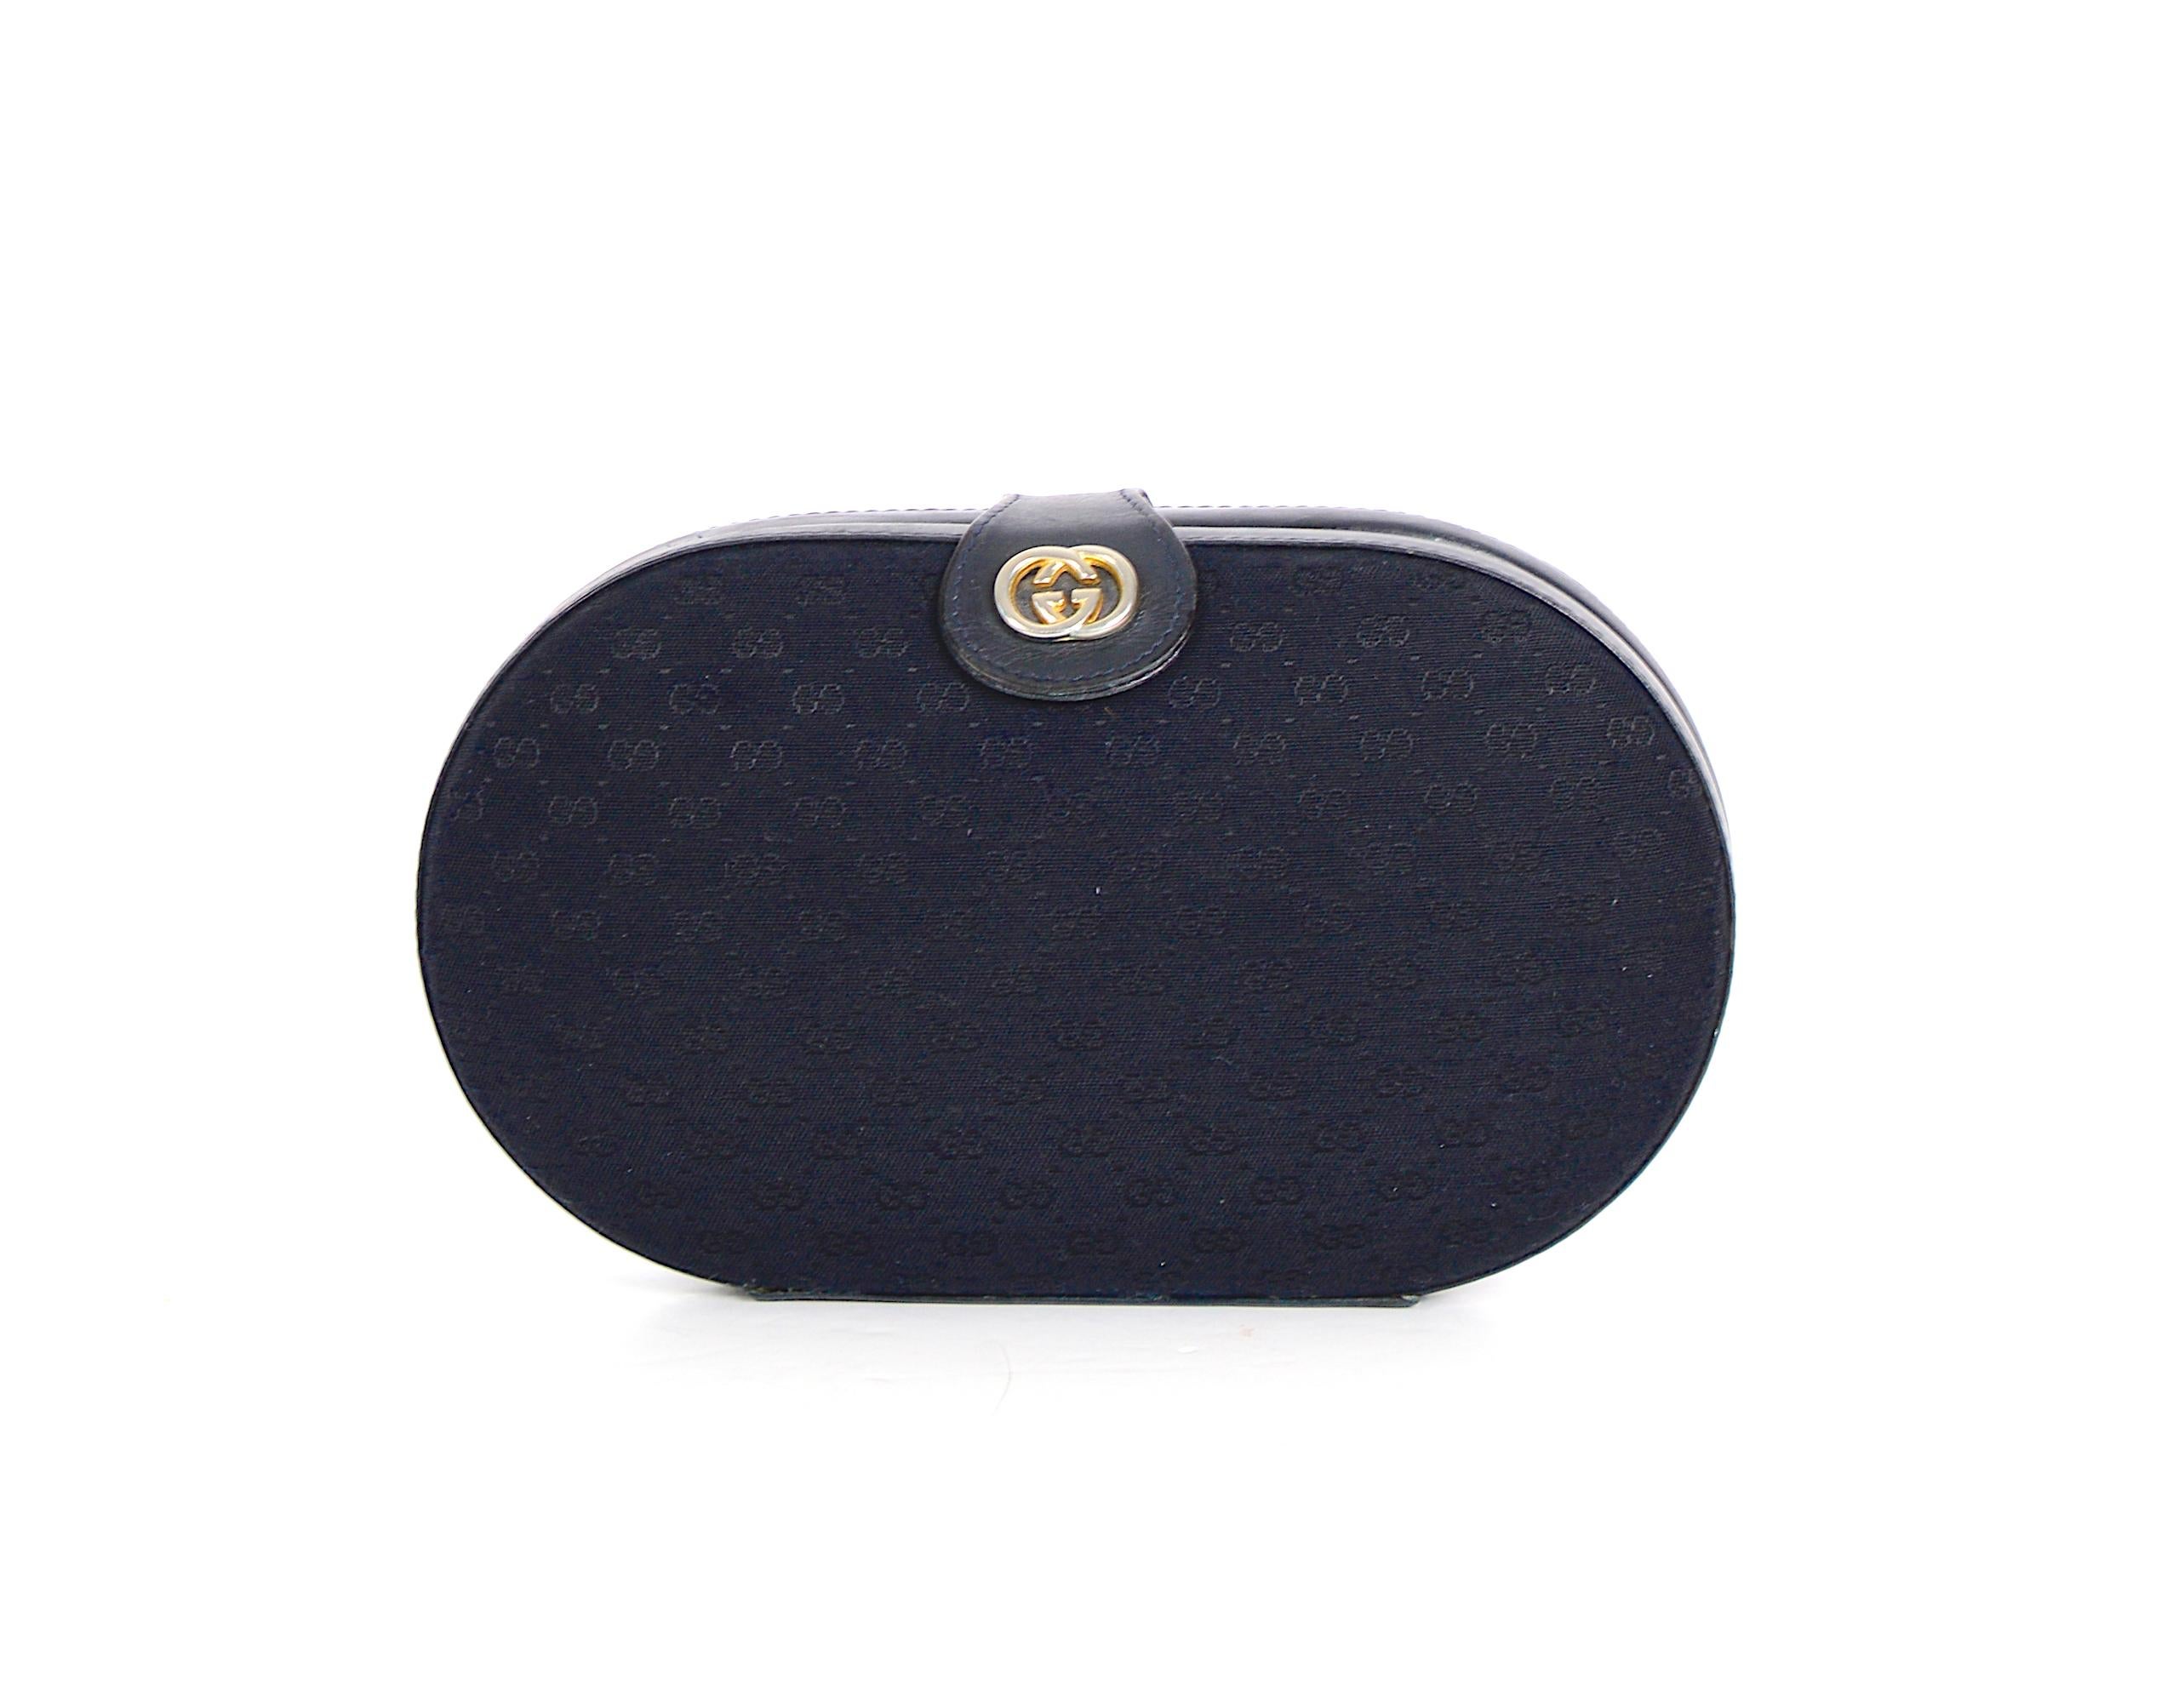 Gucci by Tom Ford vintage 1990s bleu monogram canvas leather trimmed clutch In Excellent Condition For Sale In Antwerpen, Vlaams Gewest